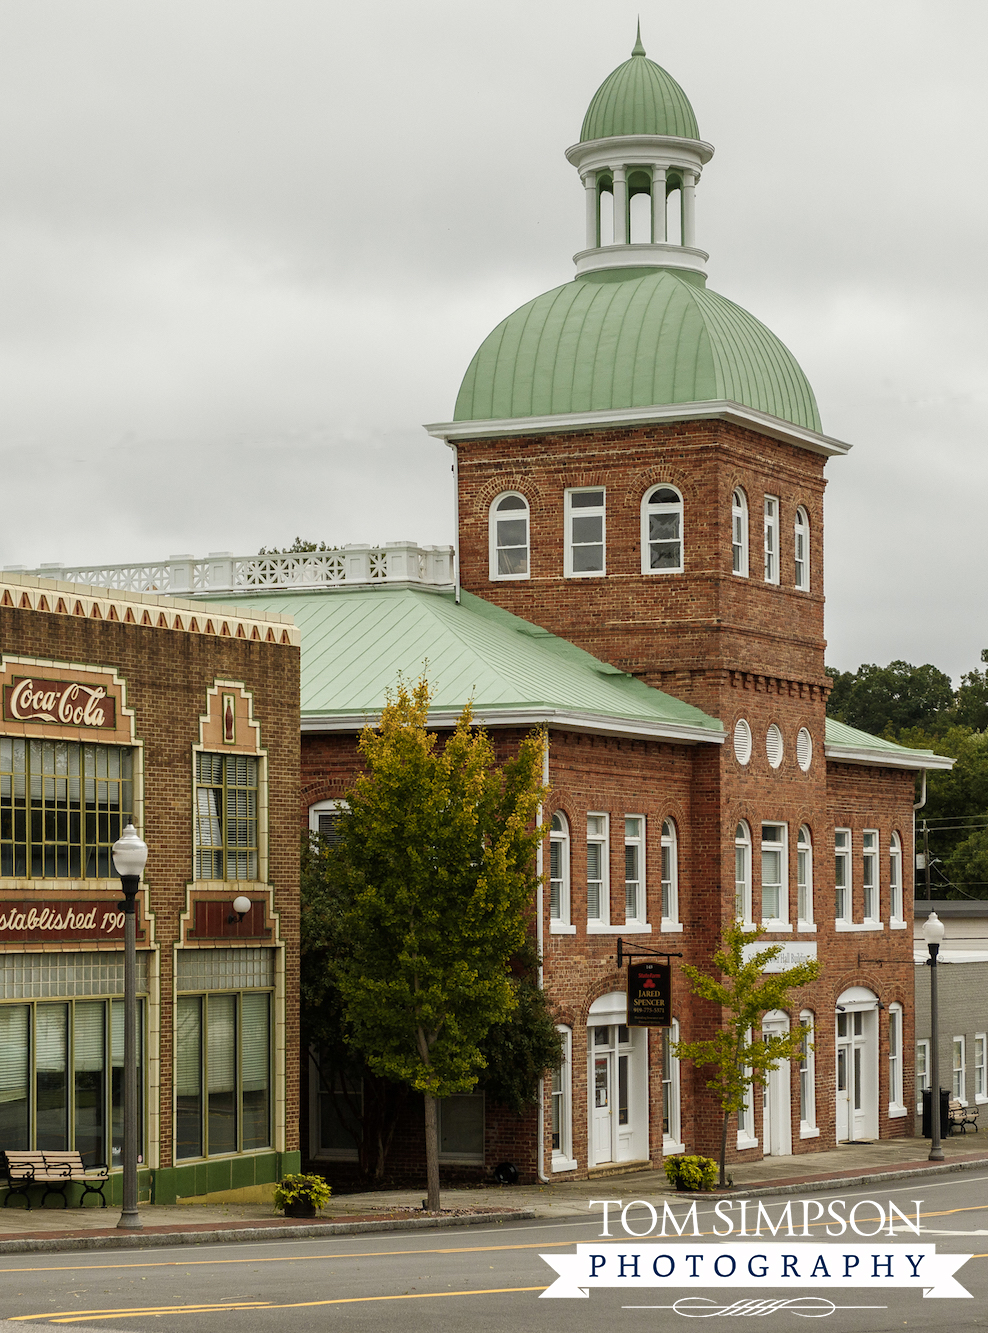 red brick building with green domed roof